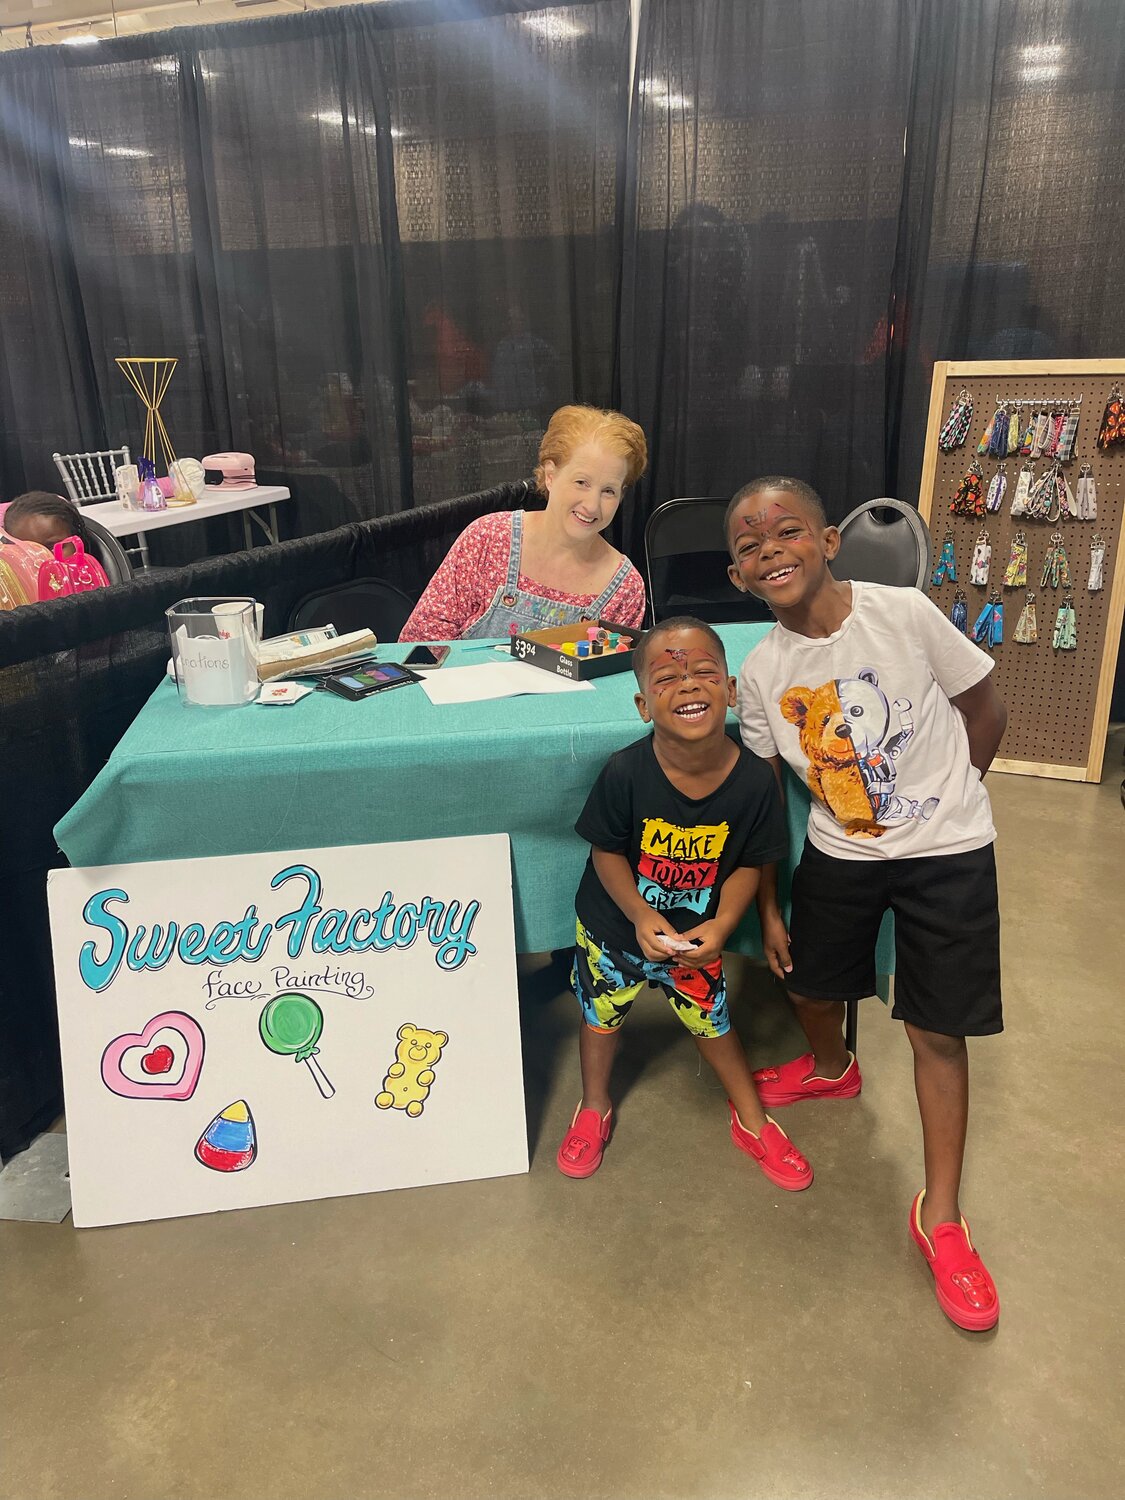 Carter Blount (right), the 8-year-old son of Sweet Factory's owners, poses with younger brother Cairo and local artist Stephanie Mollett.